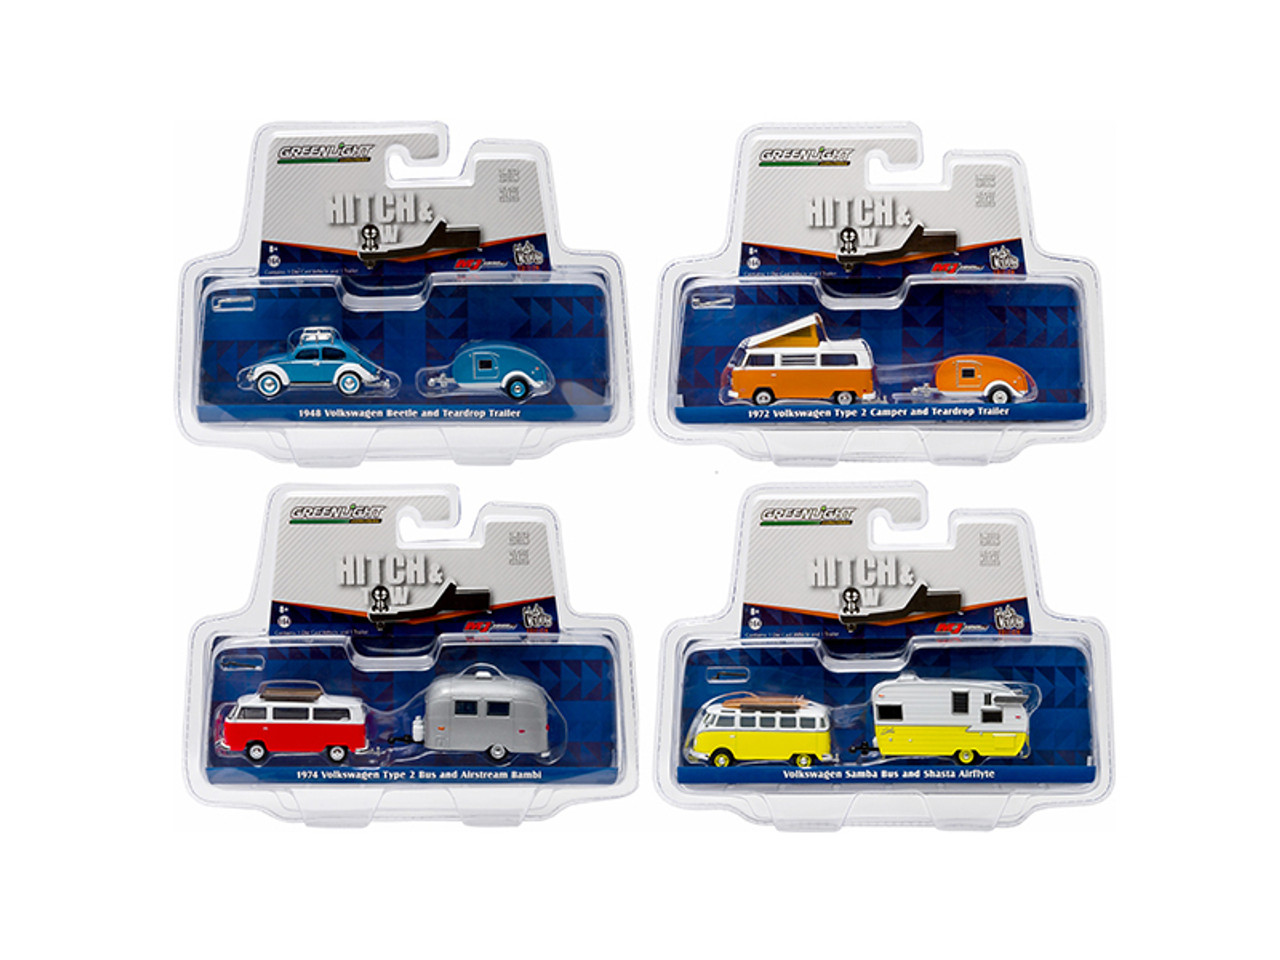 Hitch & Tow V-Dub Assortment Set of 4 1/64 Diecast Model Cars by Greenlight